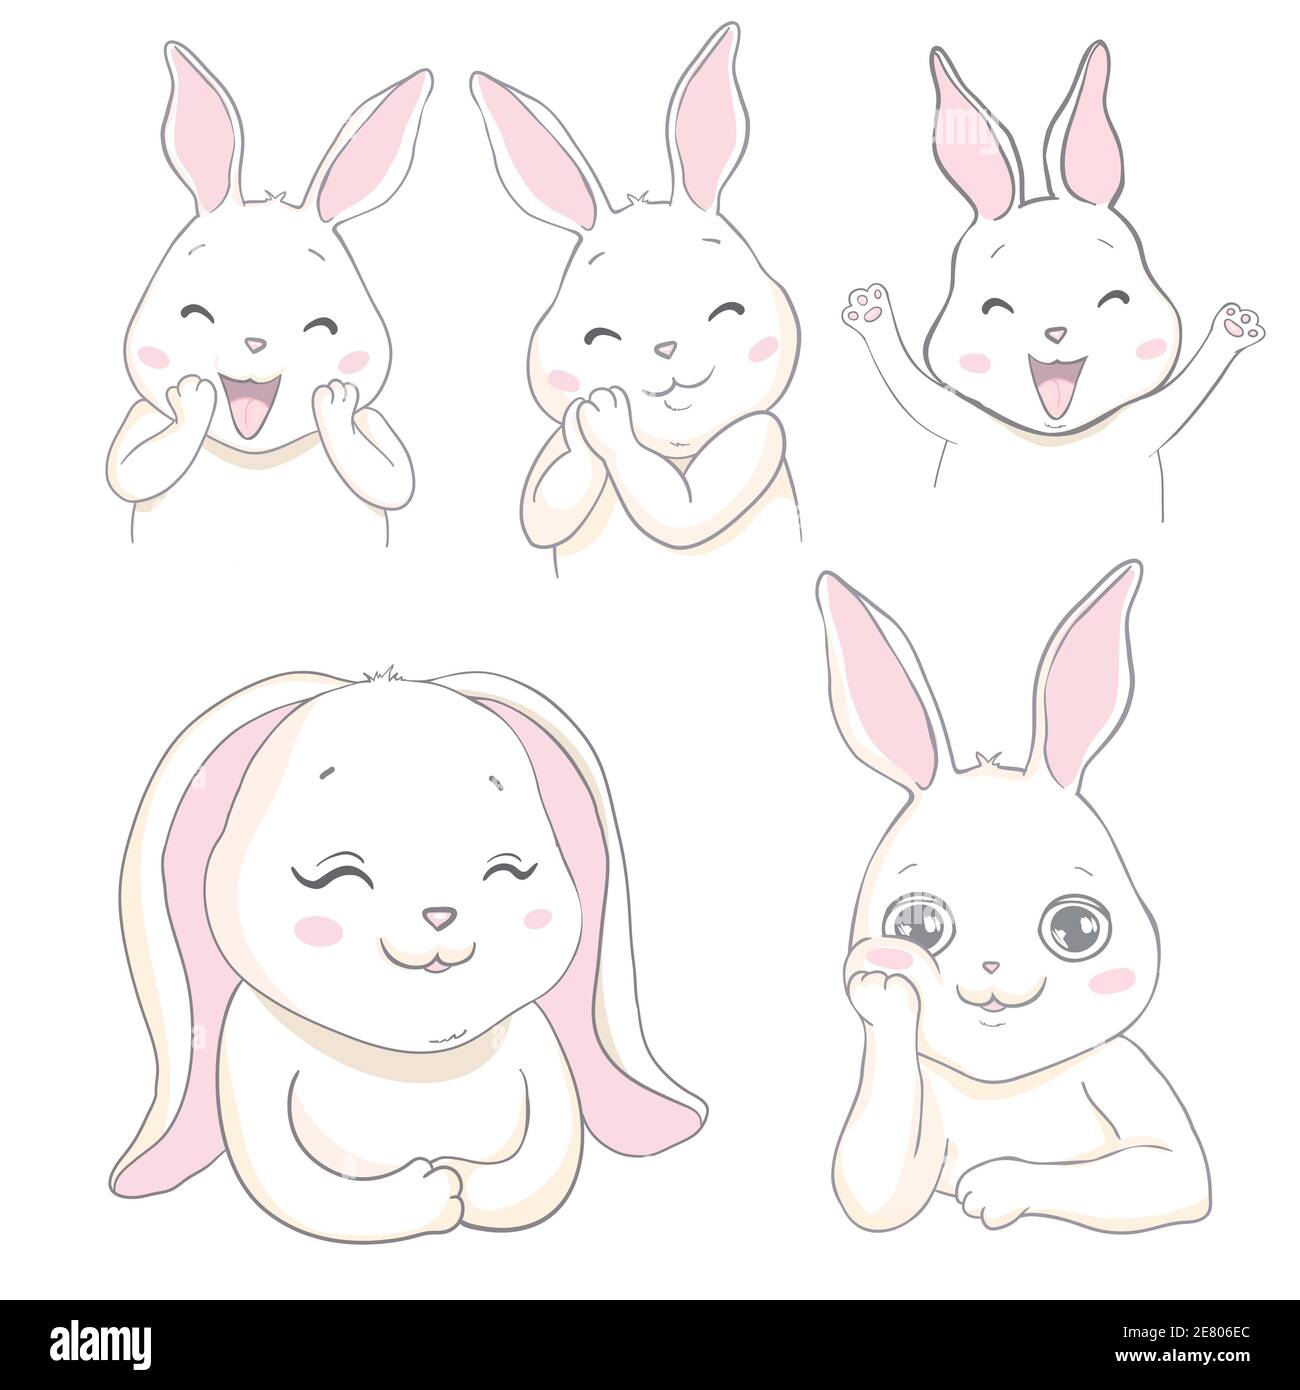 Cute little rabbits collection. Can used for greeting cards, baby shower invitations. Vector nursery illustration. Stock Vector